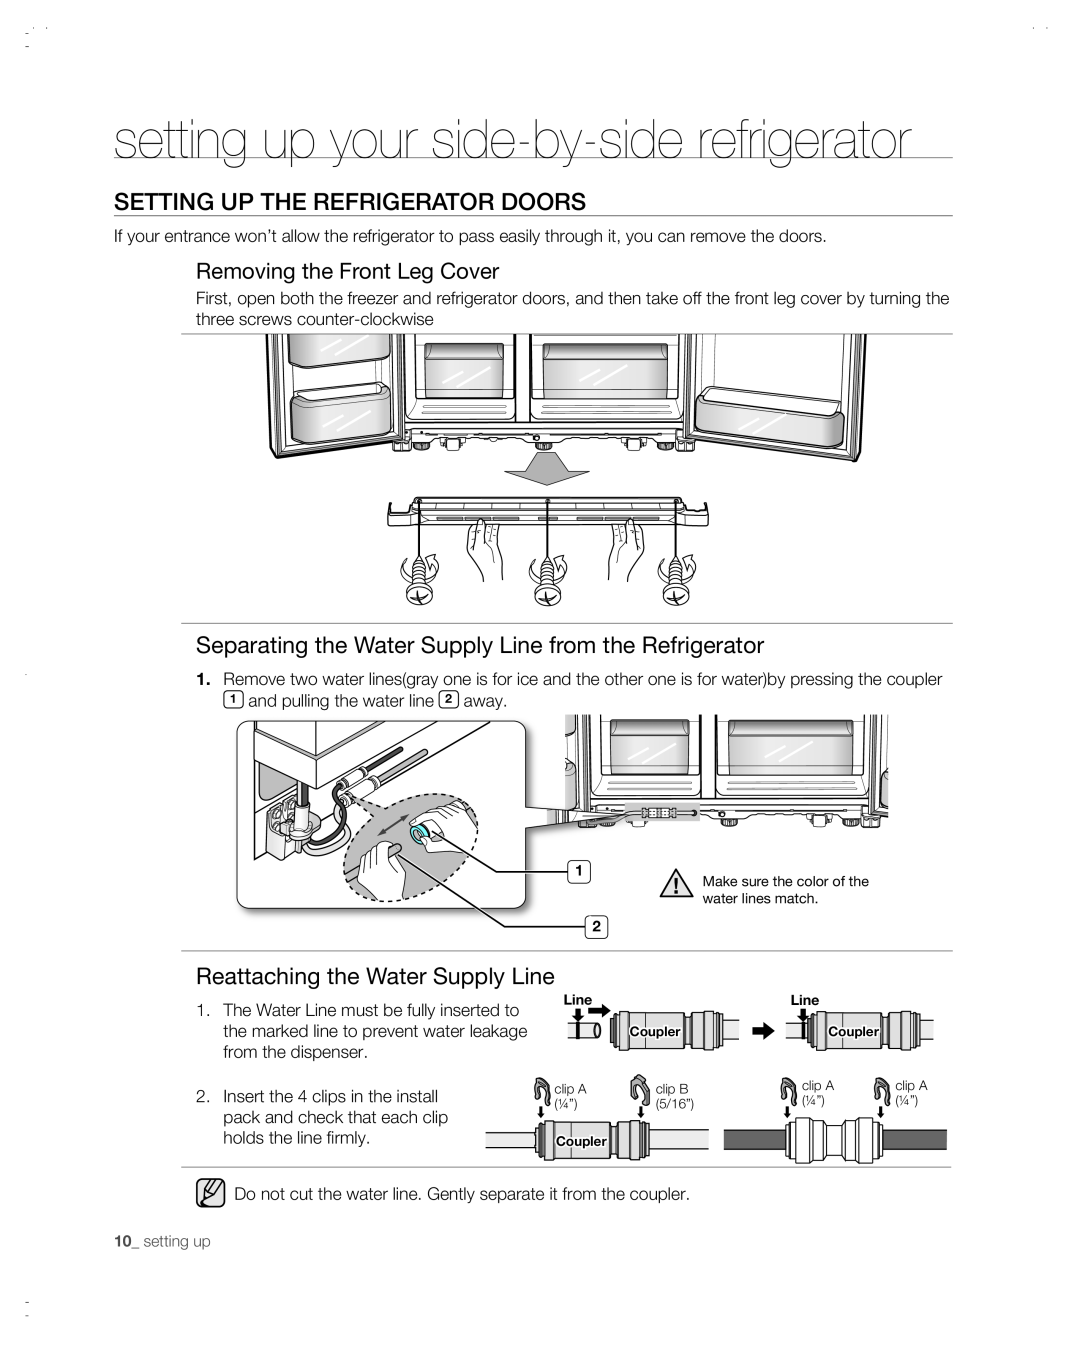 Samsung RSG257AABP user manual SETTING UP the refrigerator doors, Separating the Water Supply Line from the Refrigerator 